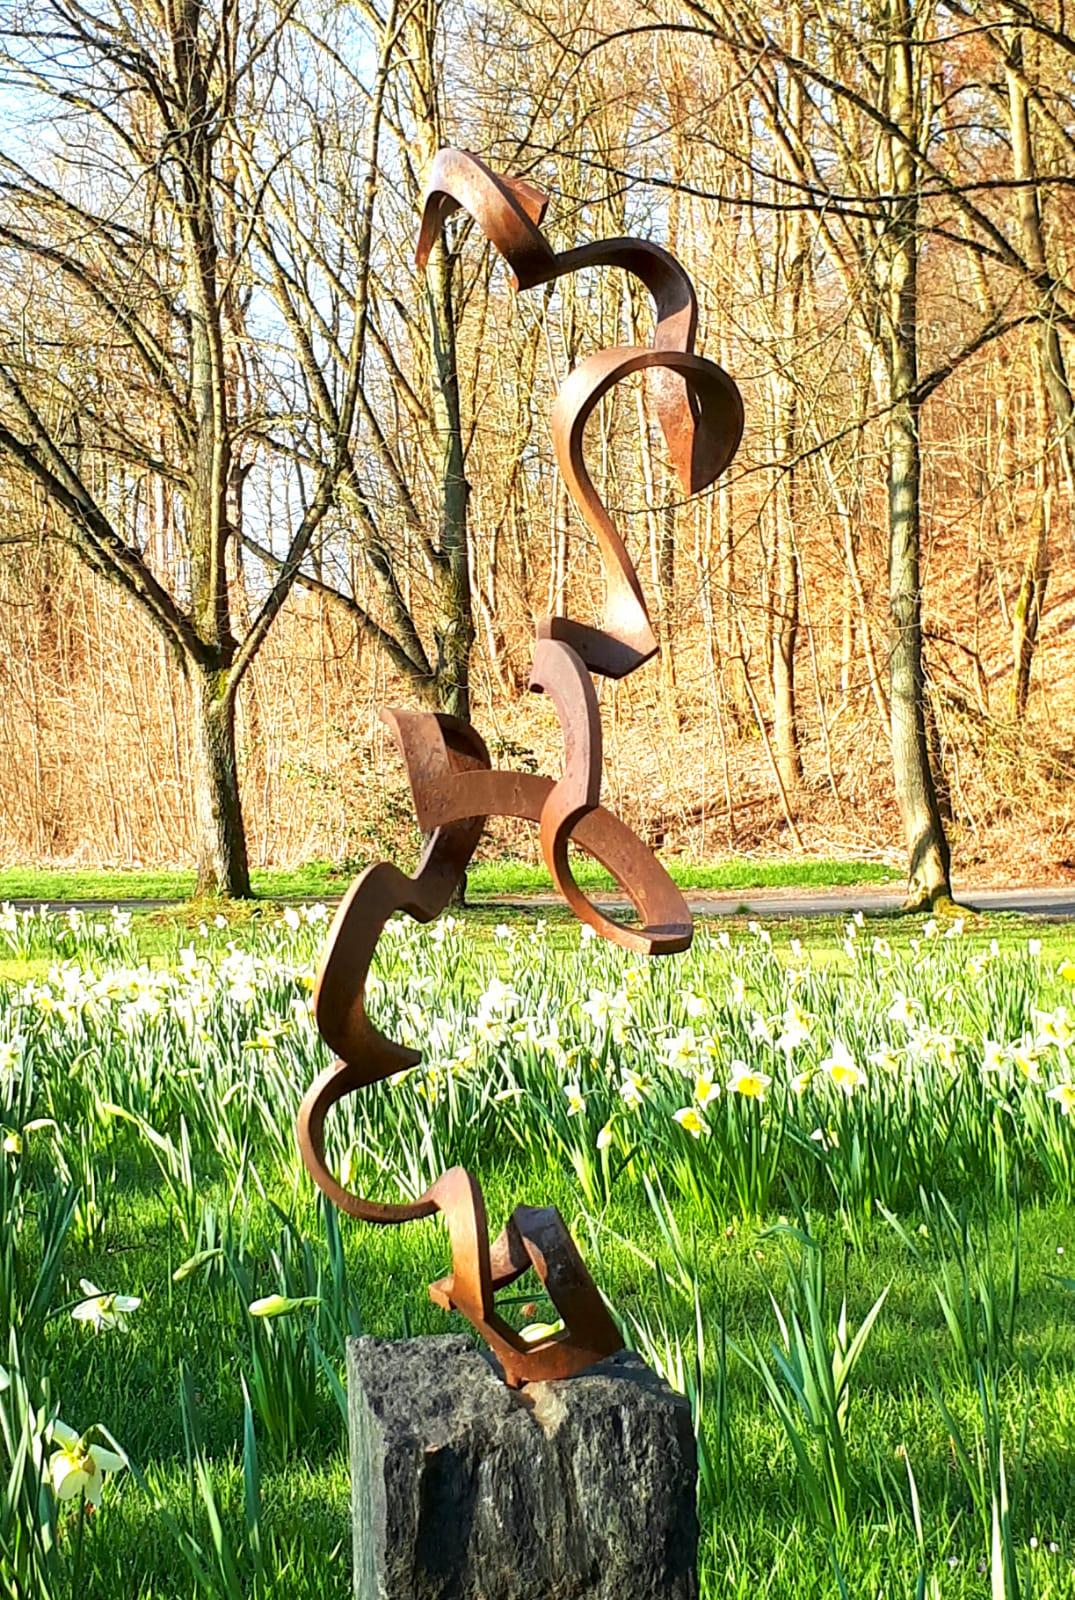 Dancing Spiral by Kuno Vollet - Contemporary Rusted Steel sculpture for Outdoors 4